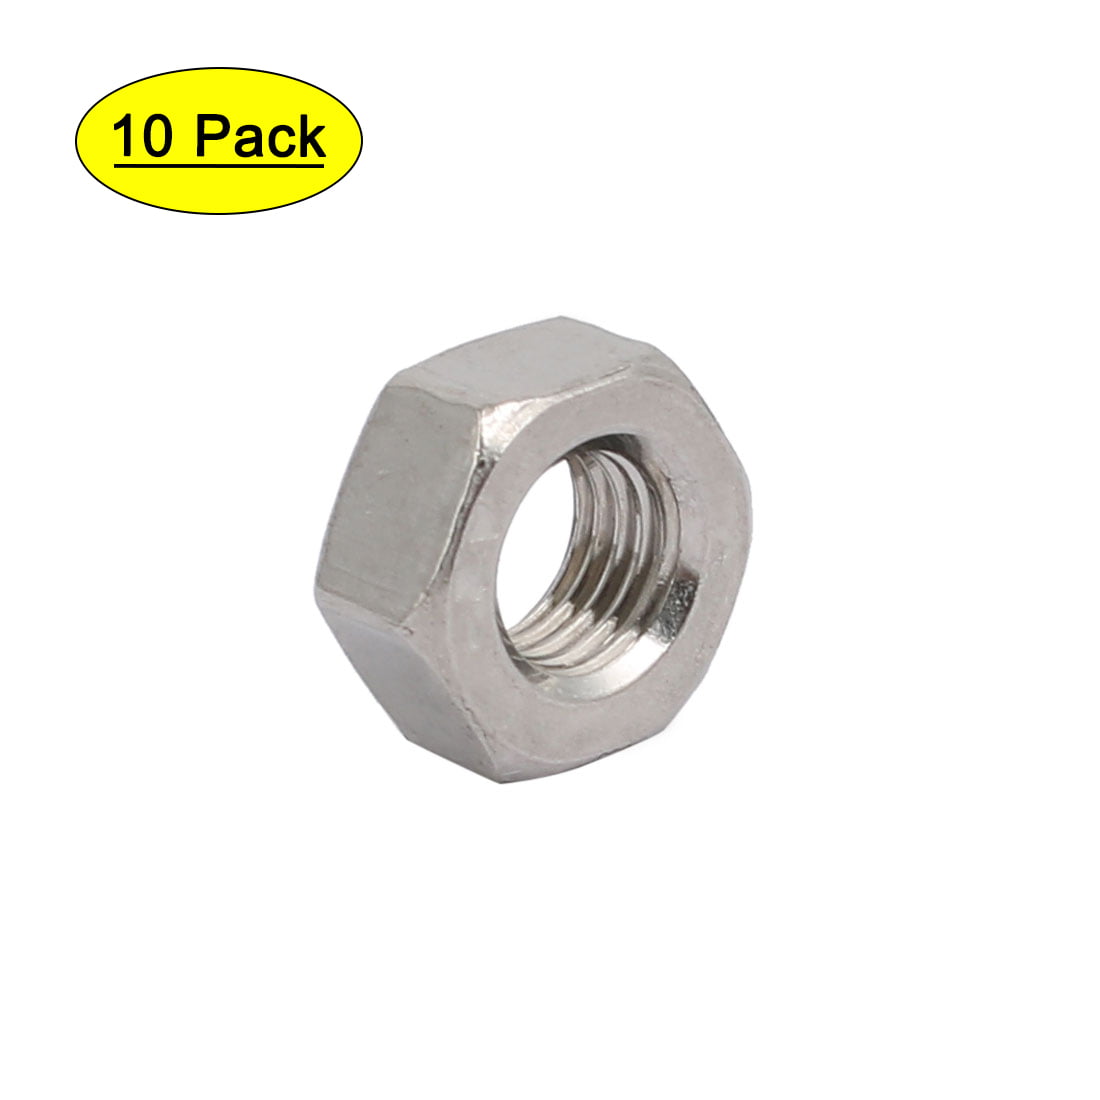 All Metal Prevailing Torque Lock Nuts AISI 304 Stainless Steel 3 pcs 1-8 Hex Drive Waxed 18-8